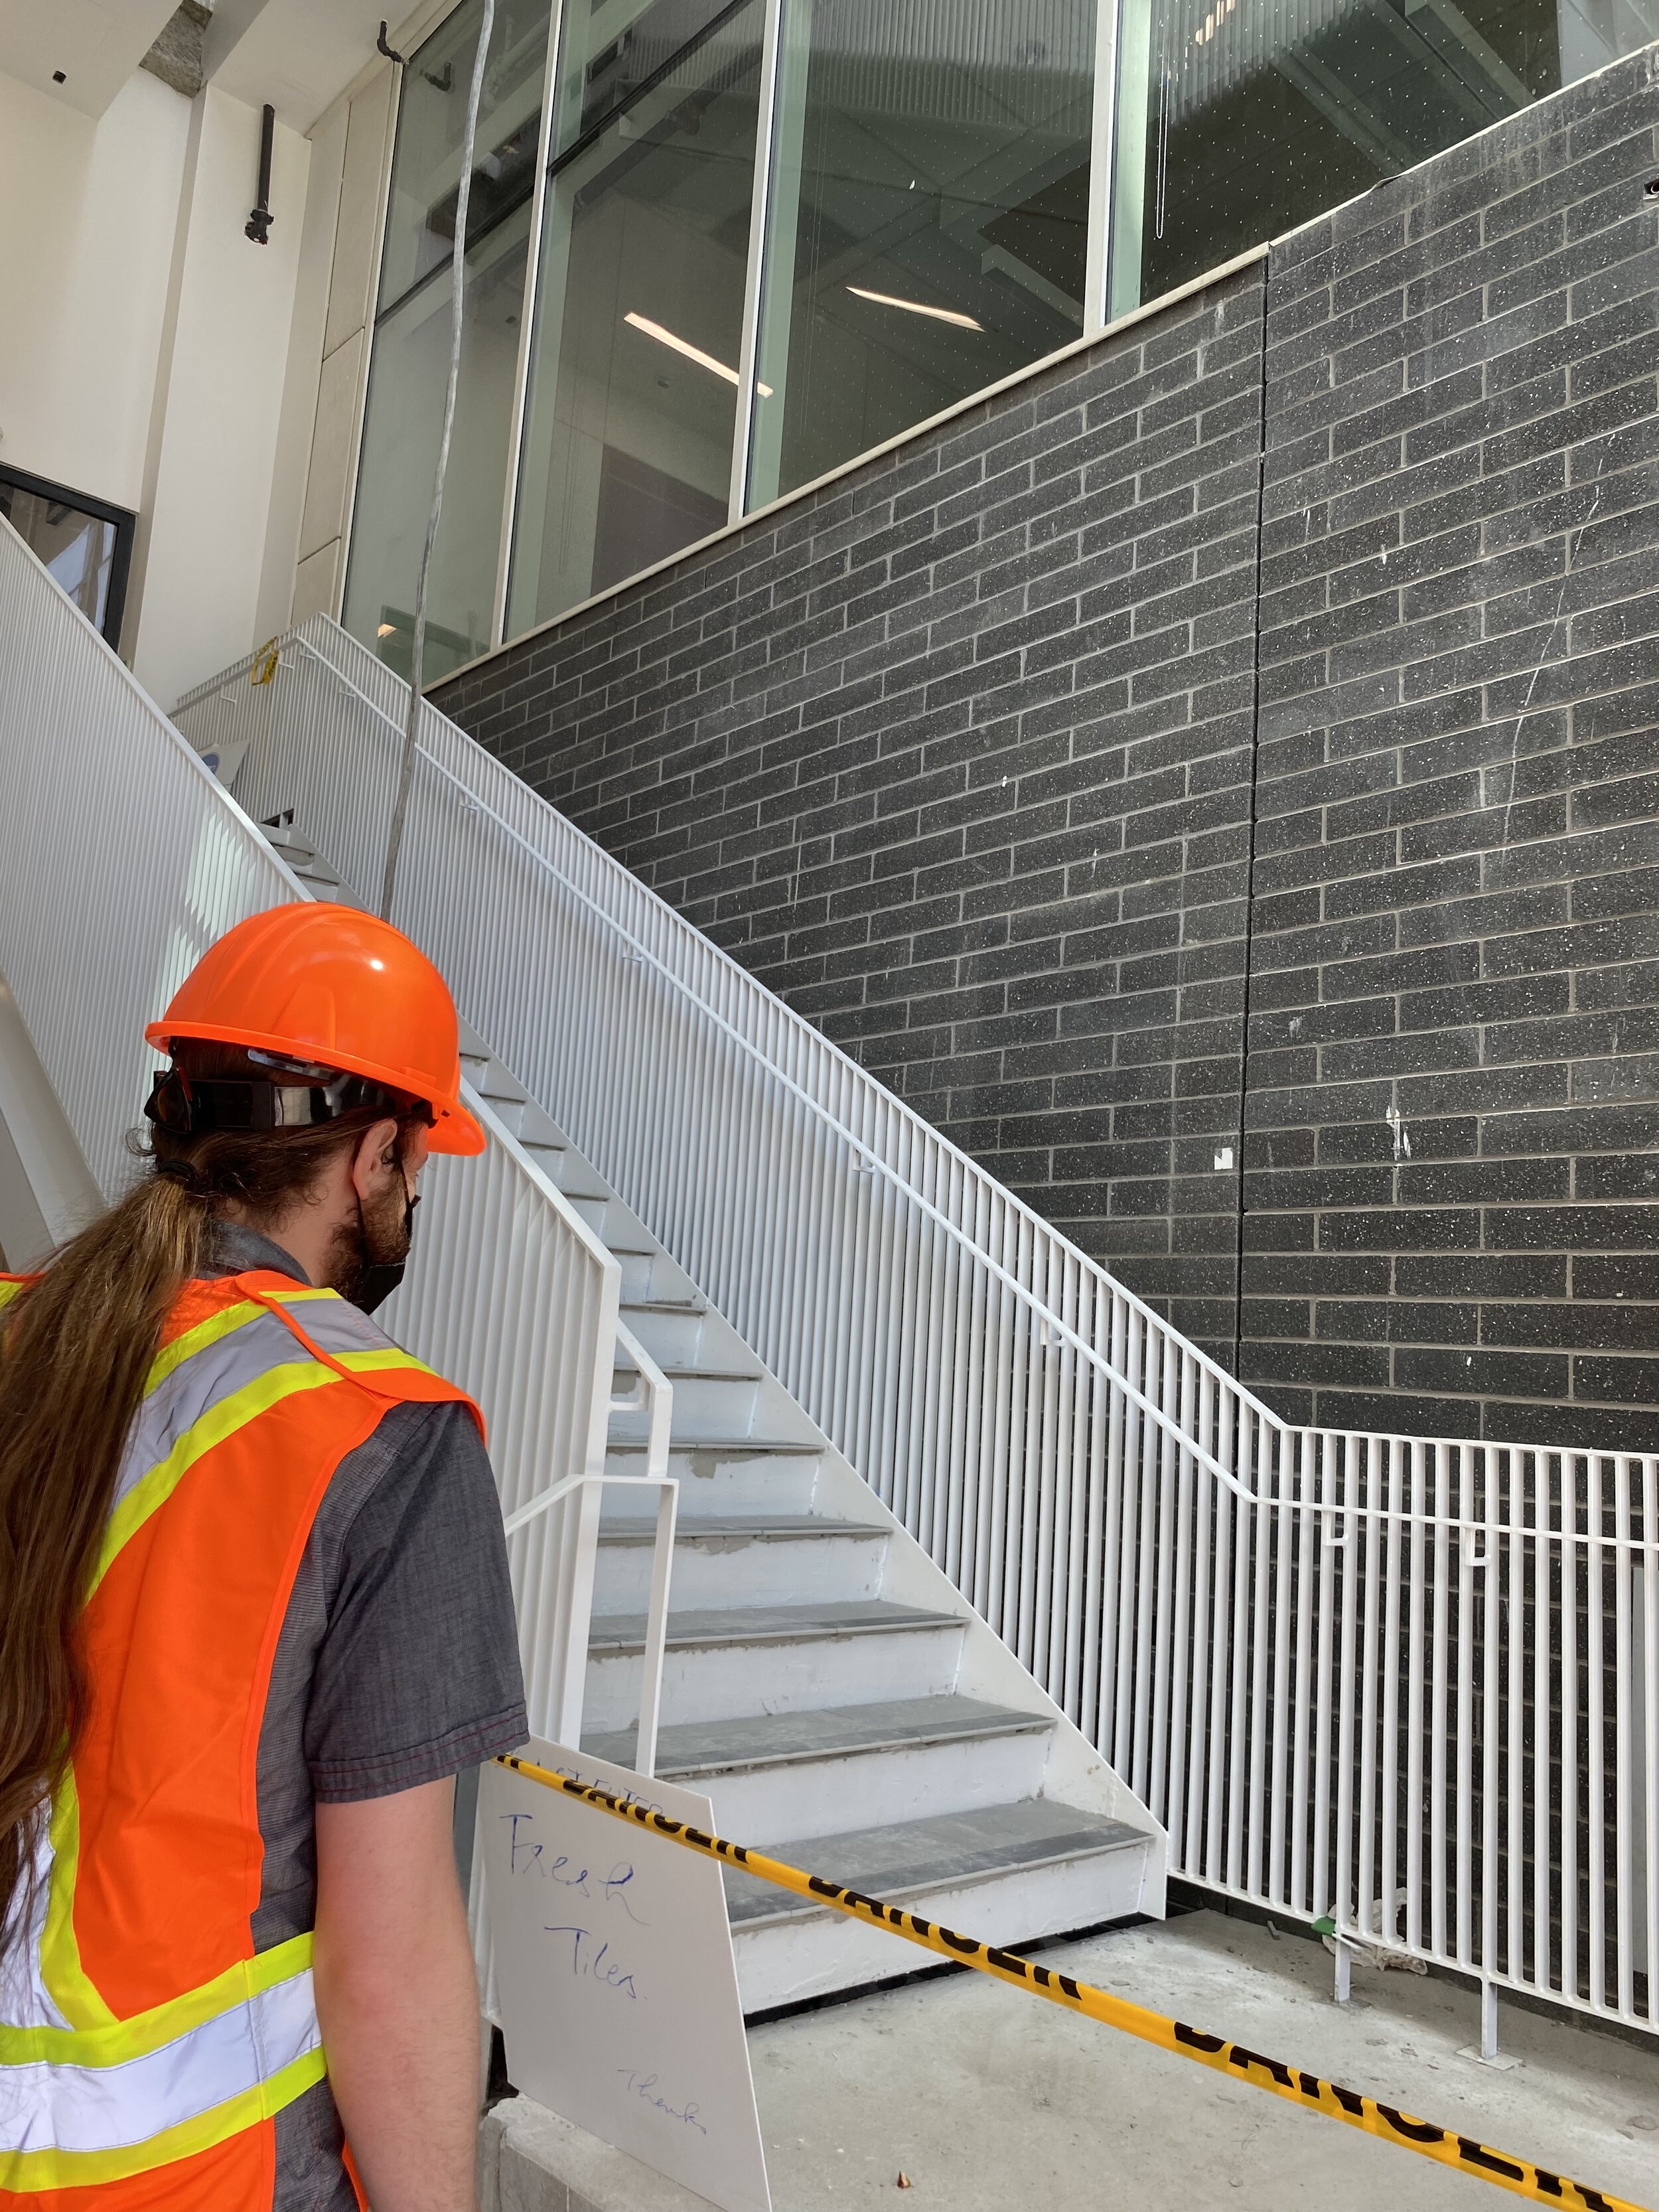  SSU President, enters stairwell entrance of Sheridan’s new Student Centre and Athletic Building (HMC2A), in Mississauga.  